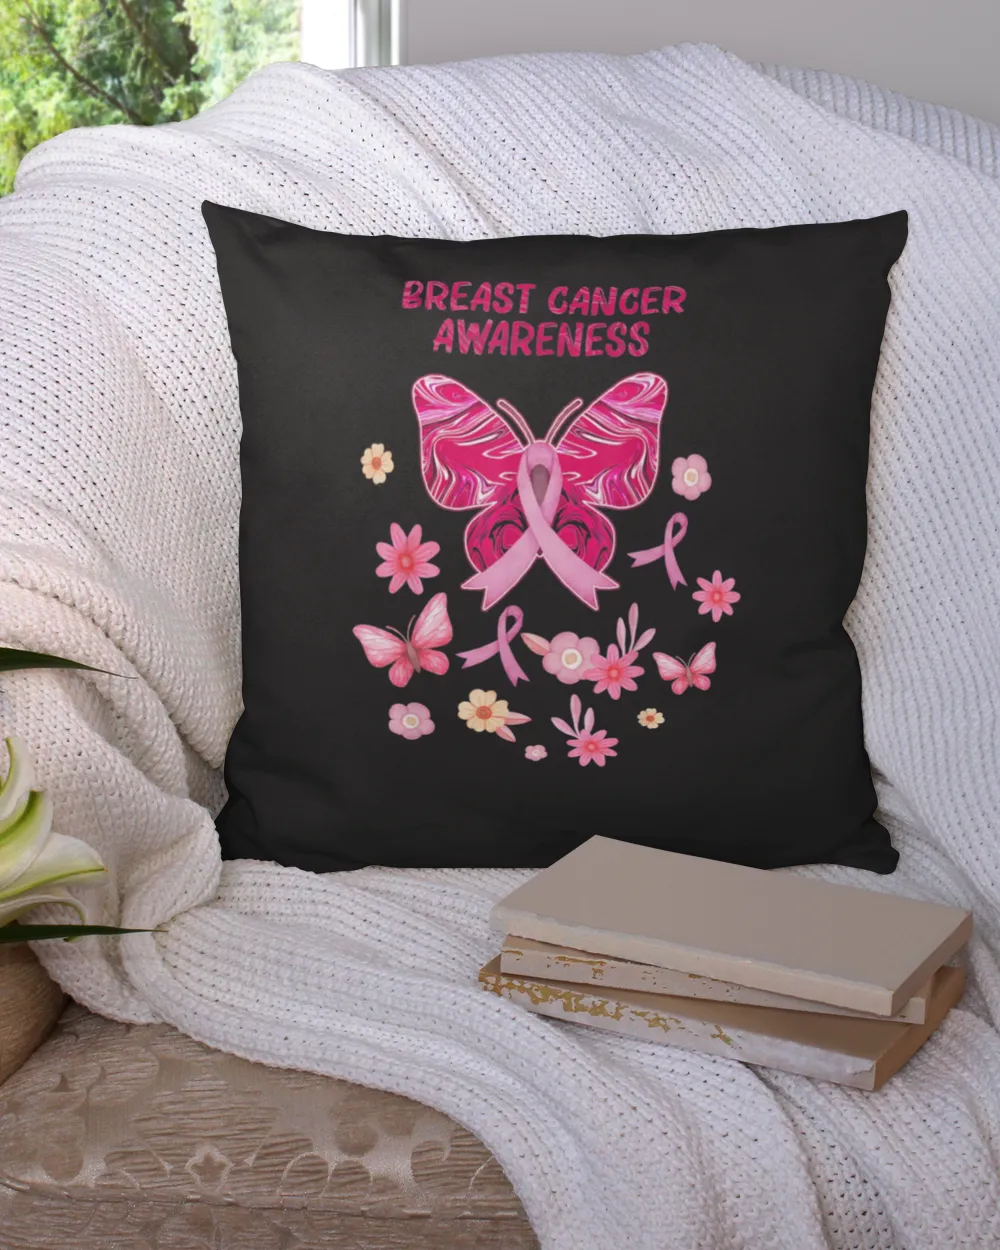 In october We Wear Pink Butterfly Breast Cancer Awar Tee Shirt